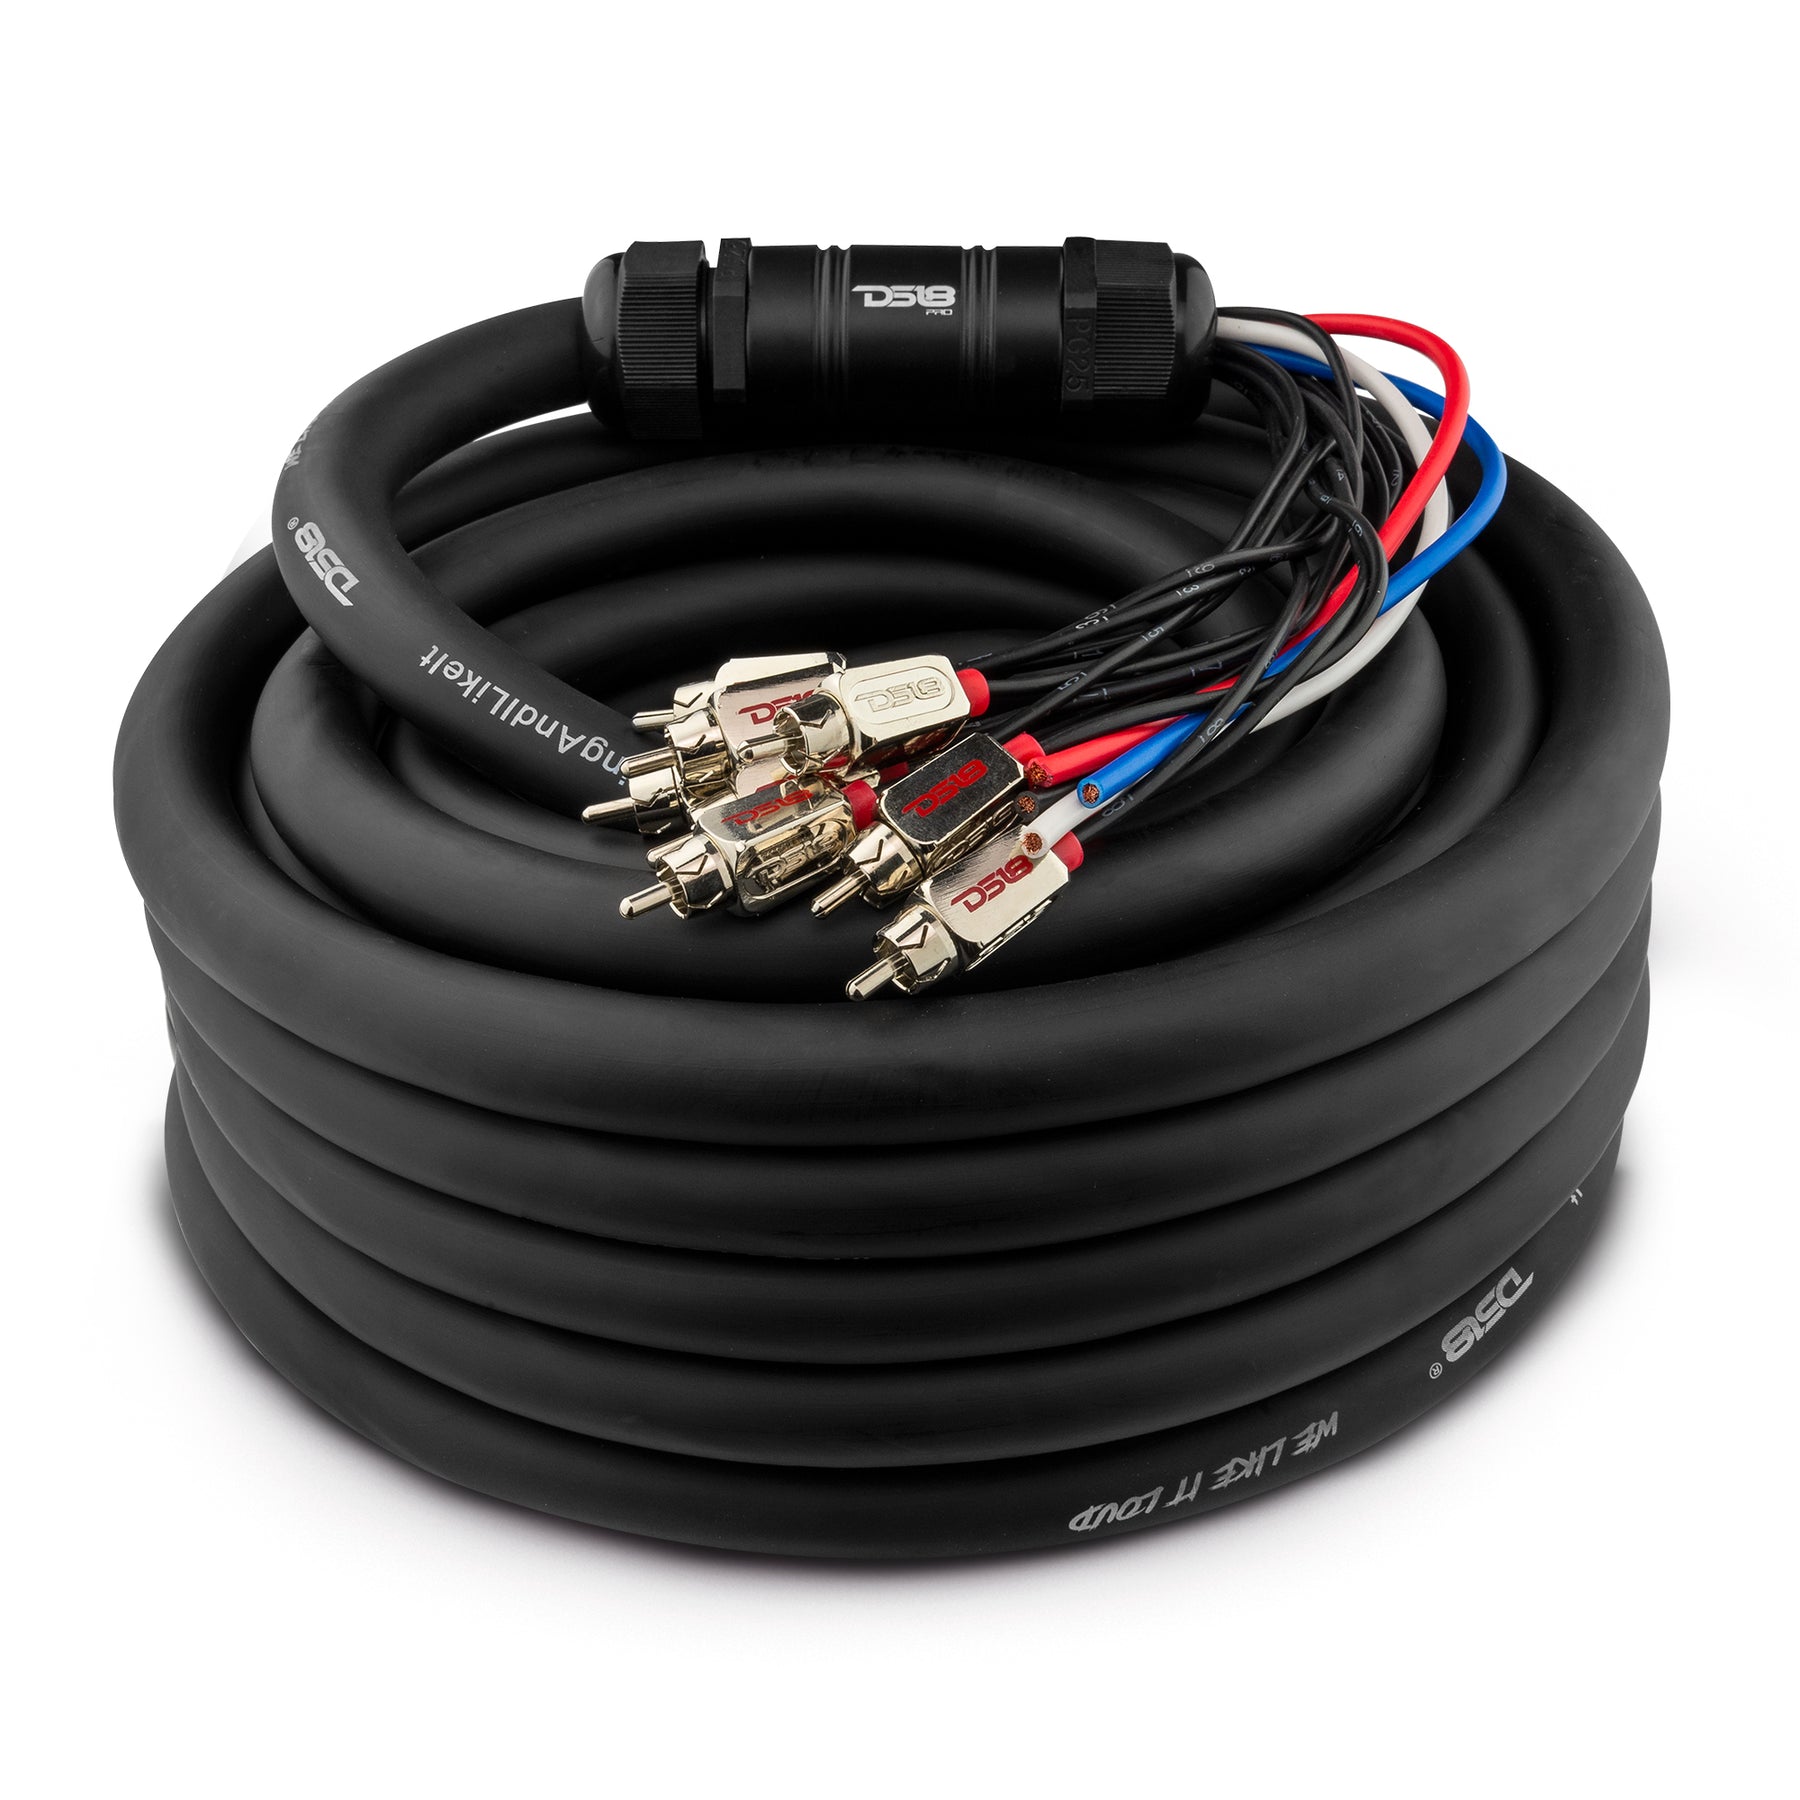 Snake, Medusa 10 Channel RCA and 4 x 12GA OFC Power Wire 50 Feet